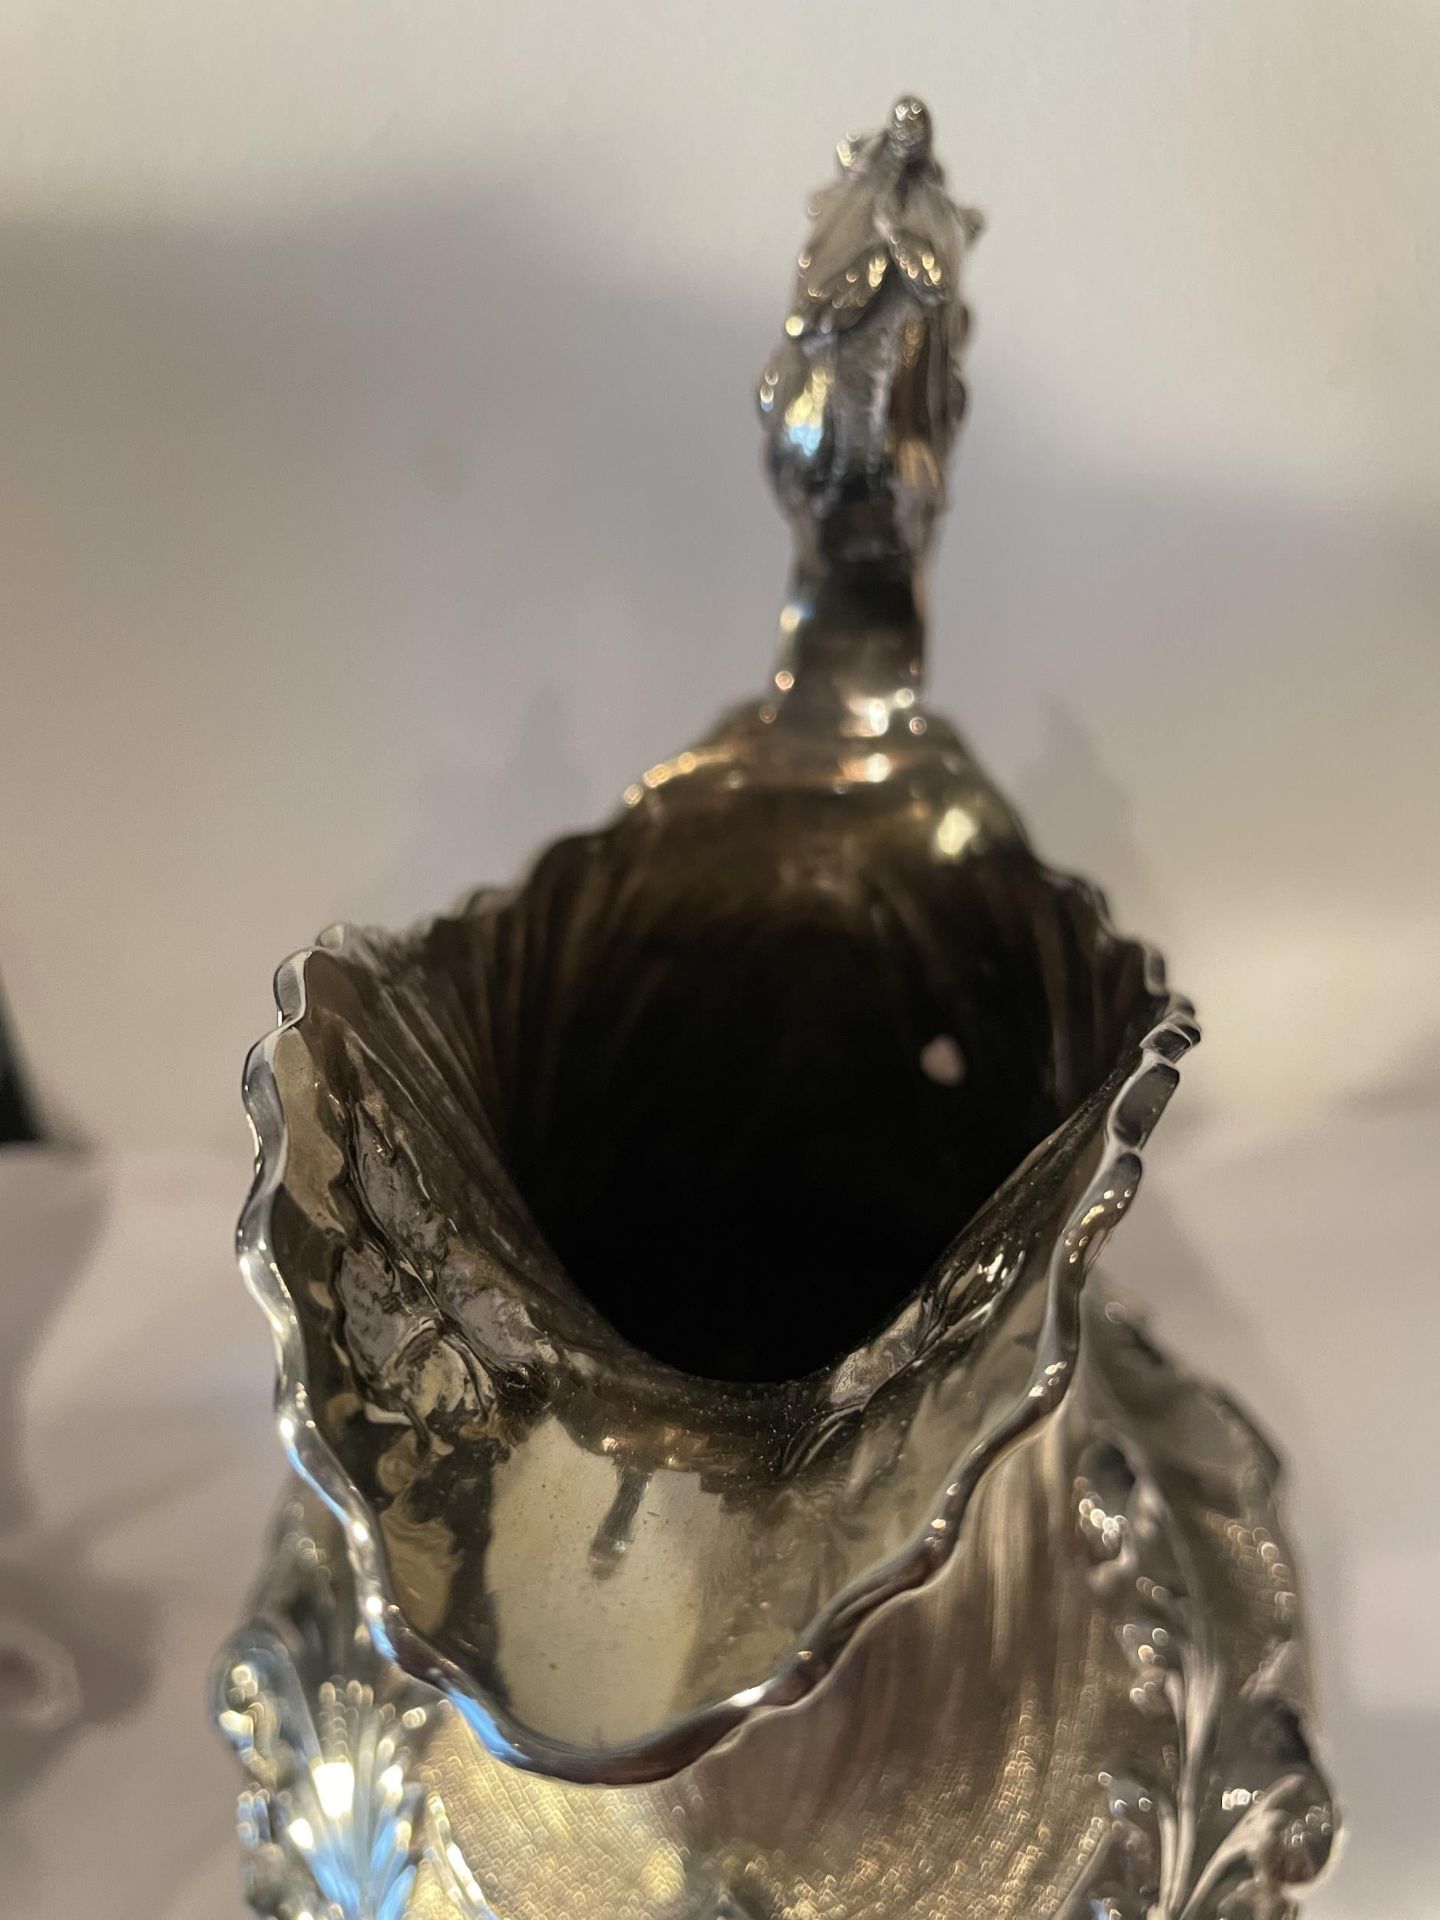 AN ORNATE 1830 HALLMARKED LONDON SILVER CLARET JUG, MAKER CHARLES FOX II GROSS WEIGHT 878 GRAMS - Image 10 of 18